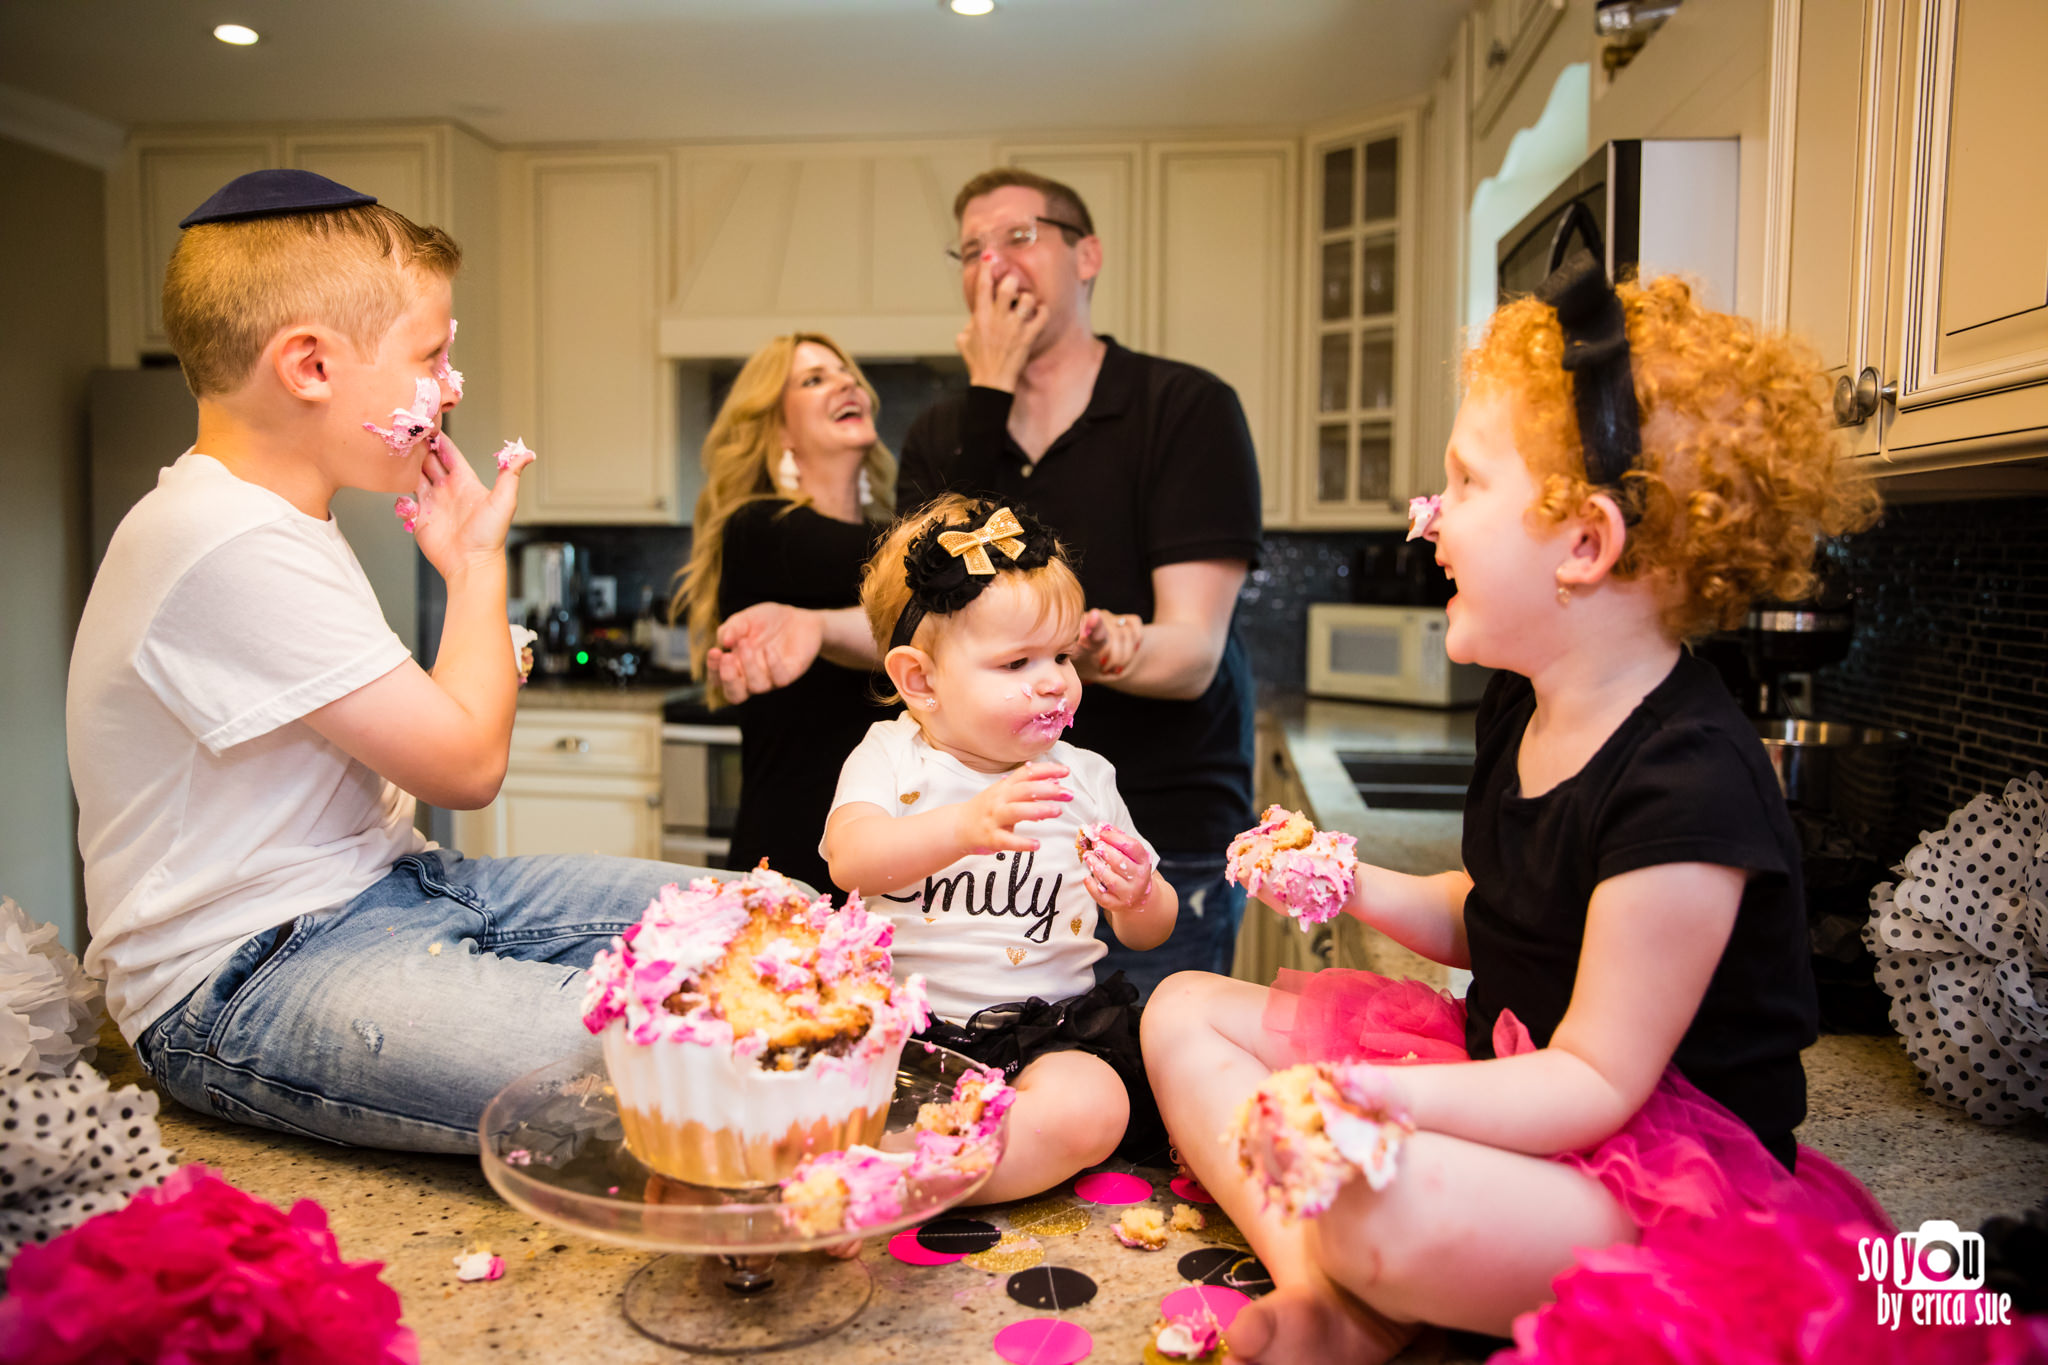 so-you-by-erica-sue-hollywood-fl-photographer-in-home-lifestyle-1st-birthday-cake-smash-4024.jpg